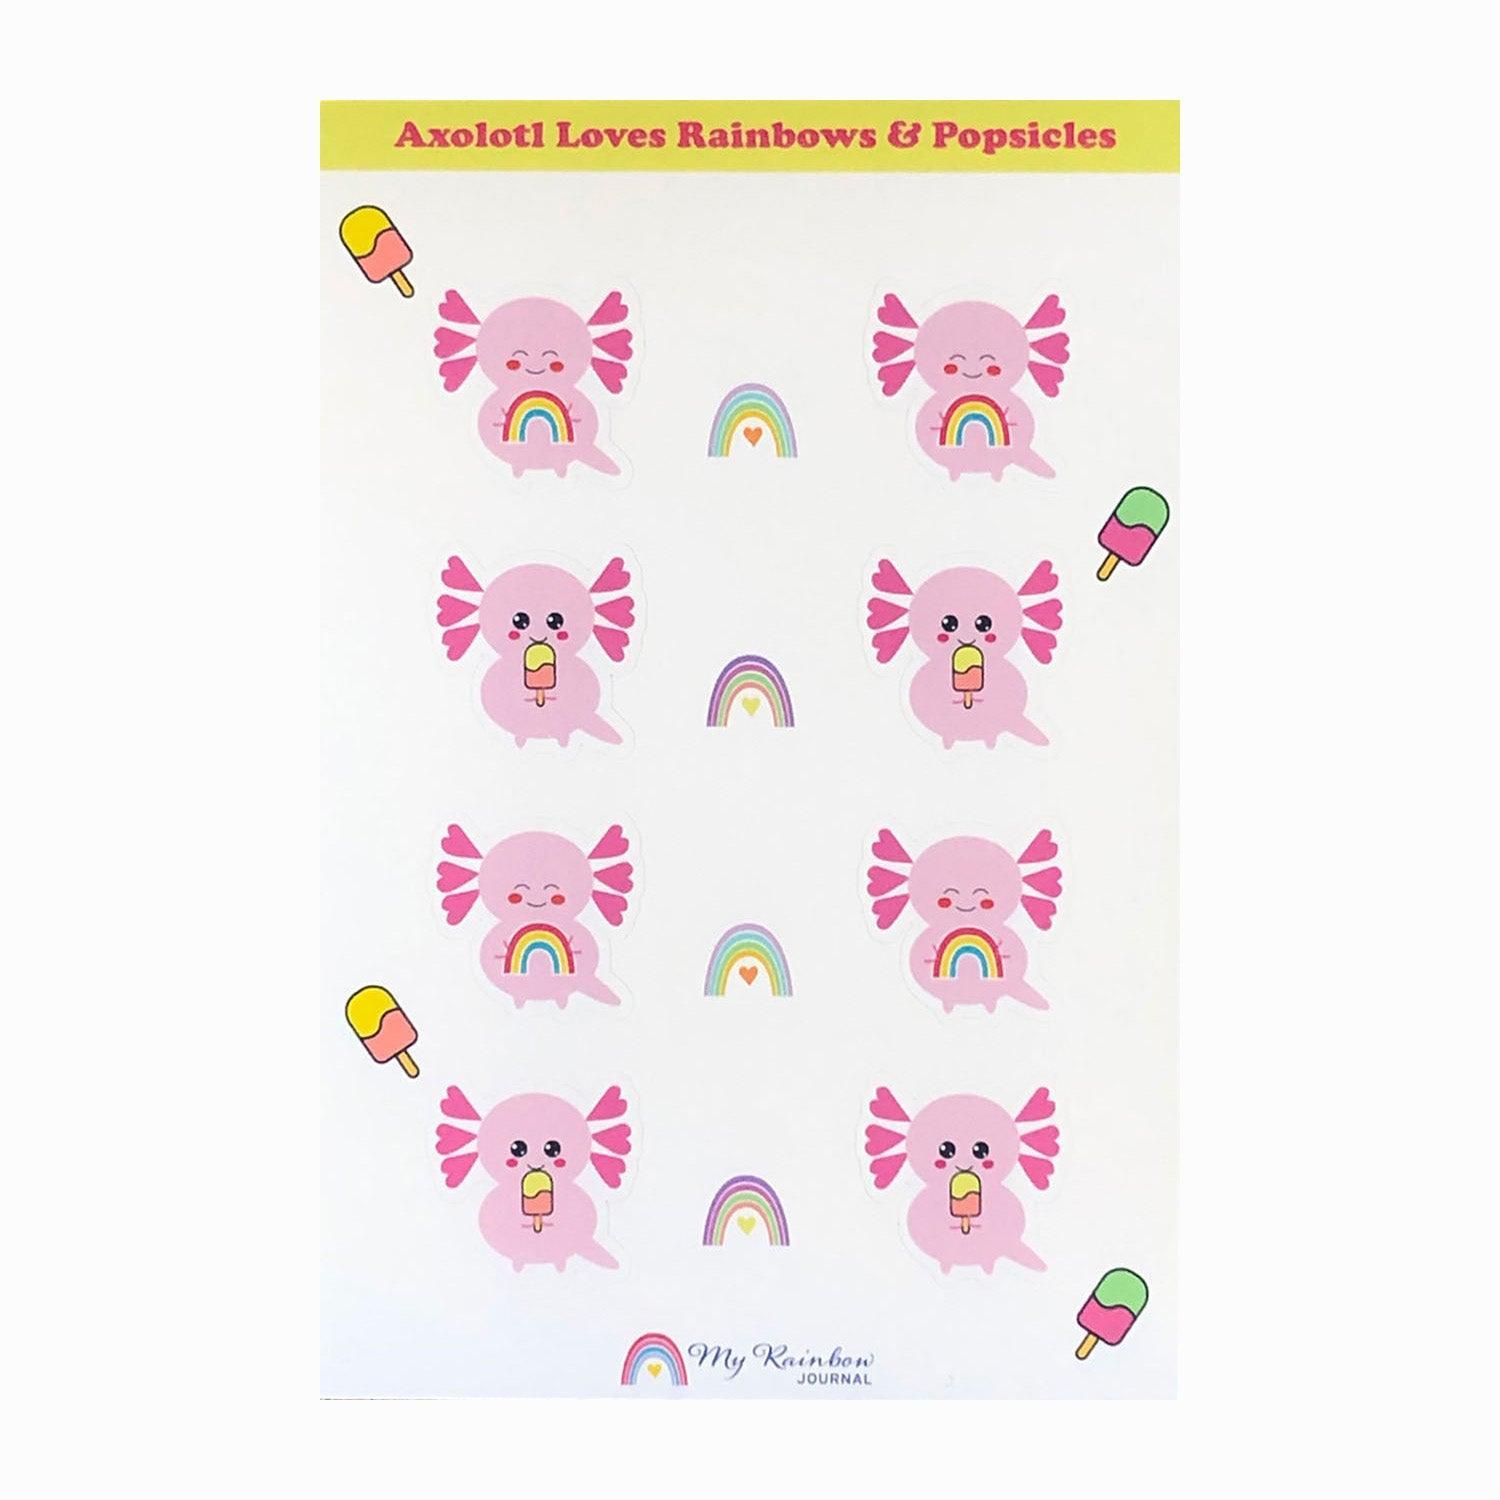 Axolotl Loves Rainbows and Popsicles Sticker Sheet - adorable pink axolotl stickers holding rainbows and eating popsicles